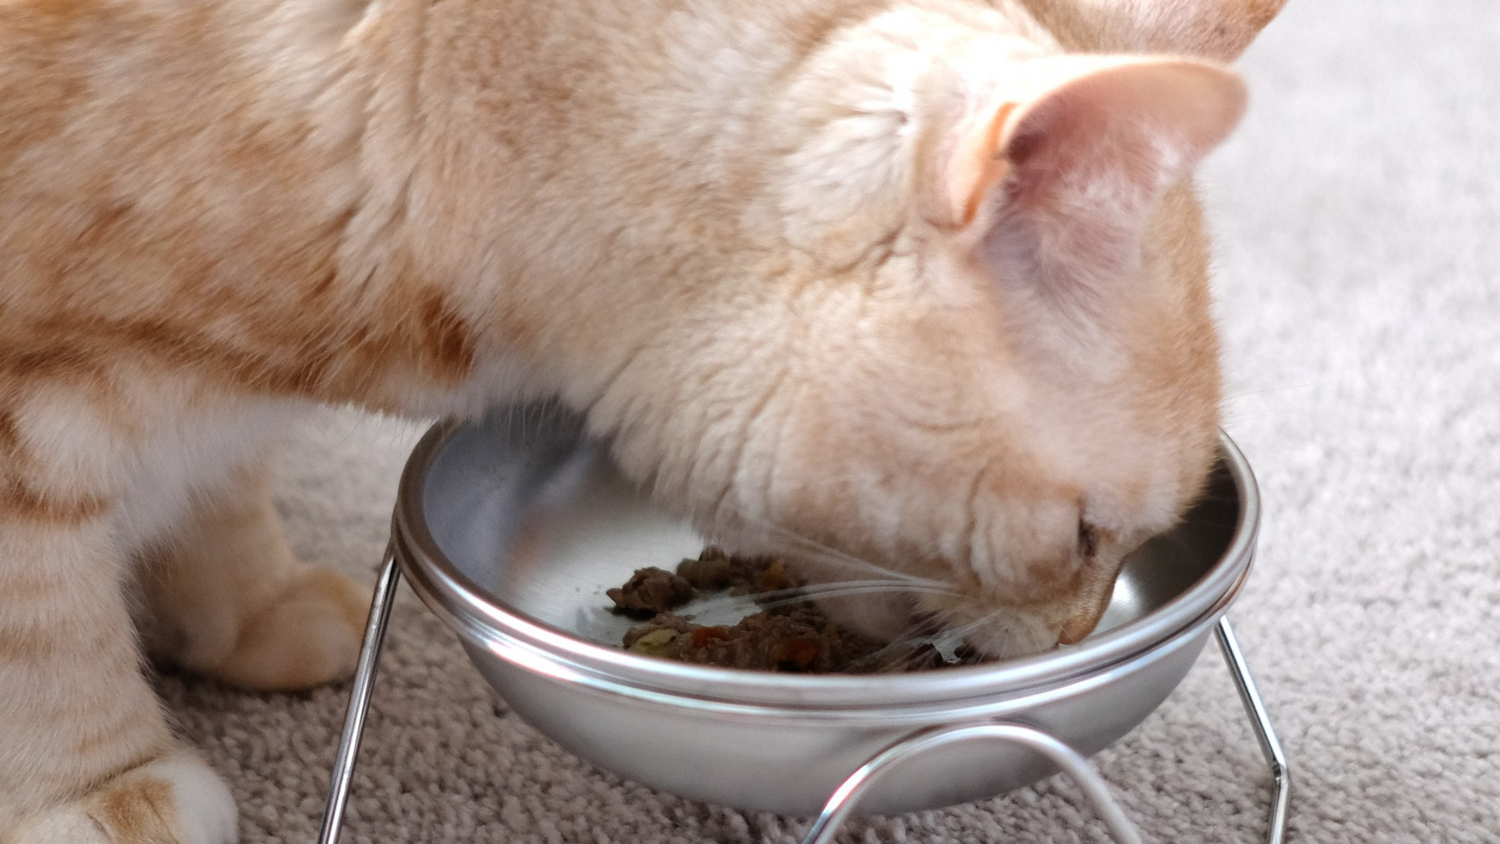 light orange cat eating kibble from an elevated cat bowl made from stainless steel